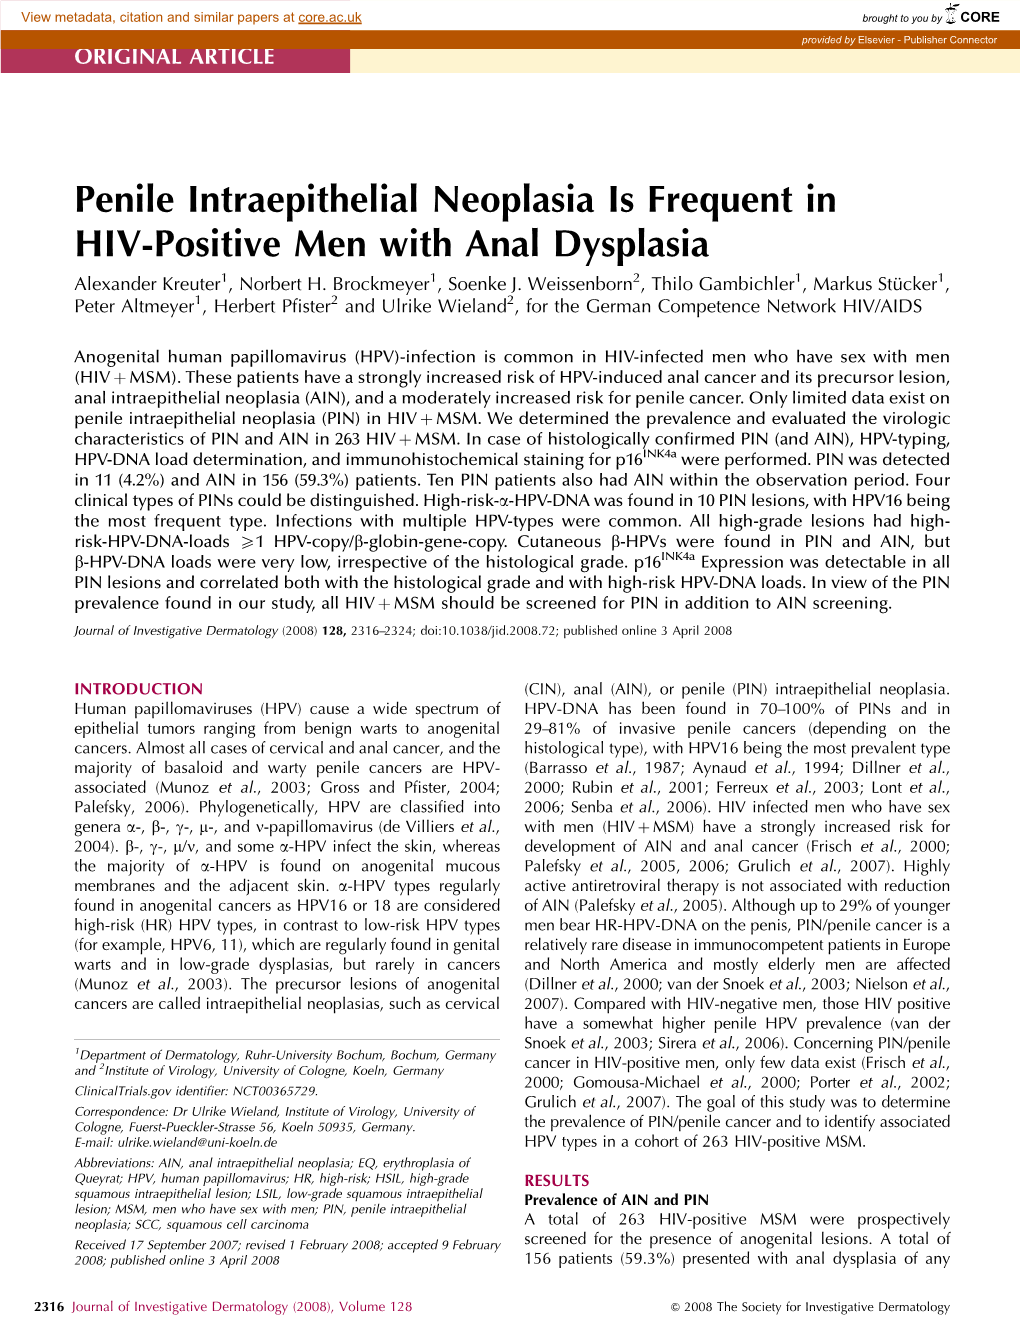 Penile Intraepithelial Neoplasia Is Frequent in HIV-Positive Men with Anal Dysplasia Alexander Kreuter1, Norbert H